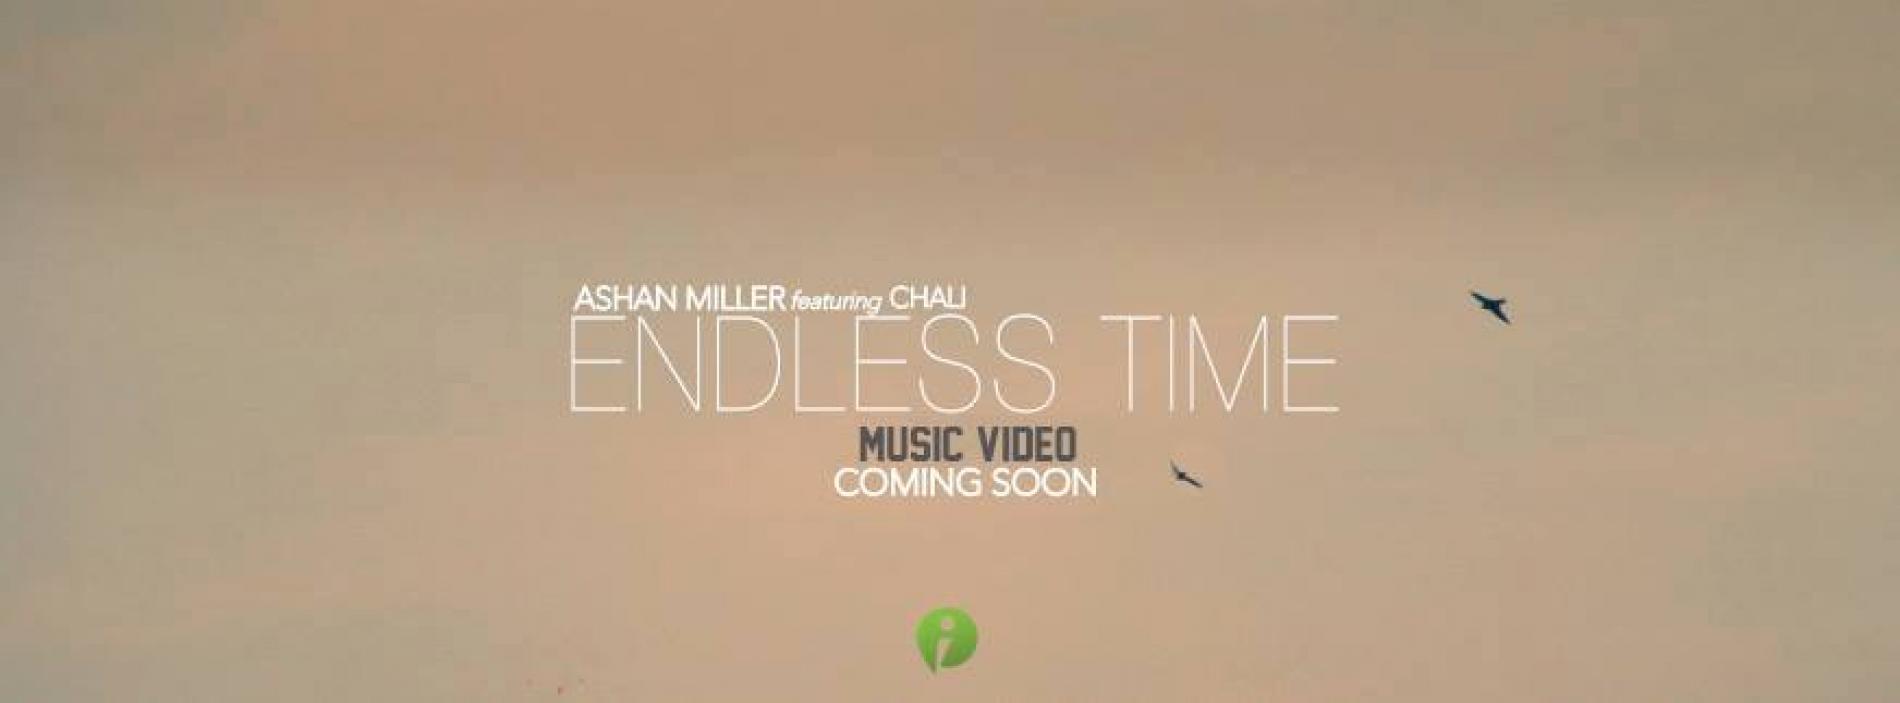 Ashan Miller & Chali’s Endless Time Gets A Video Release Date